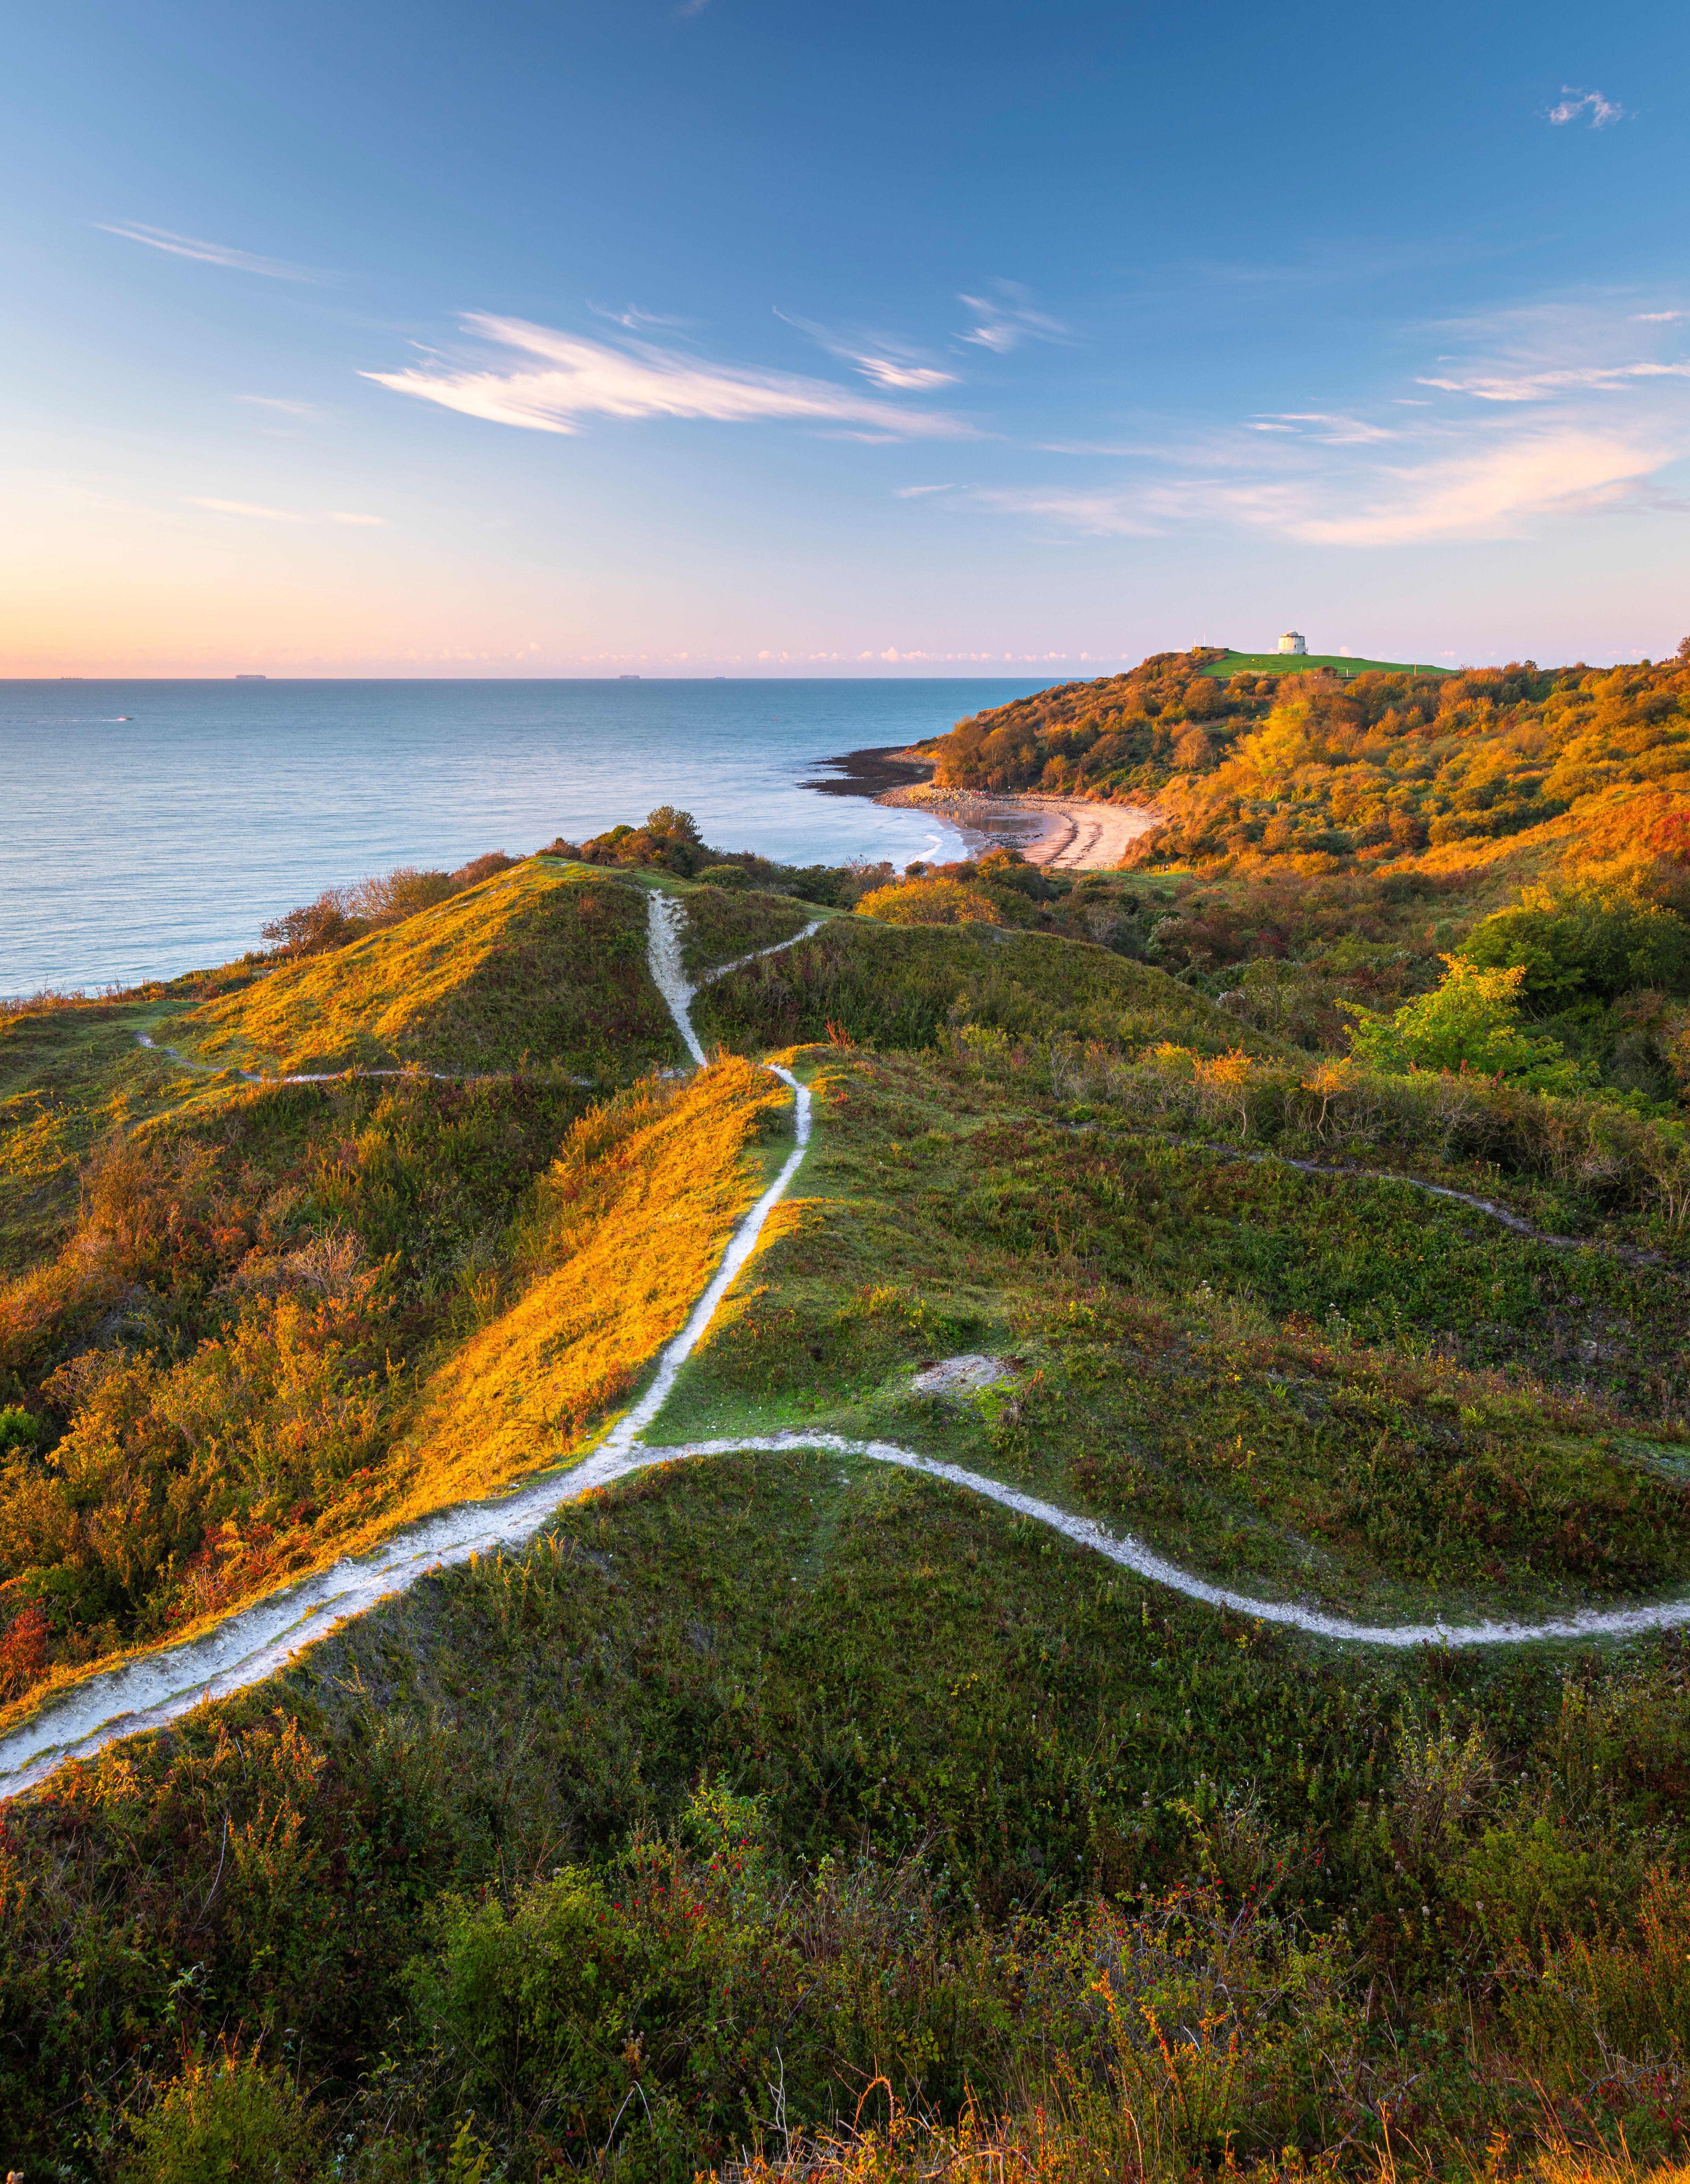 Folkestone Warren has been named one of the most beautiful places on earth